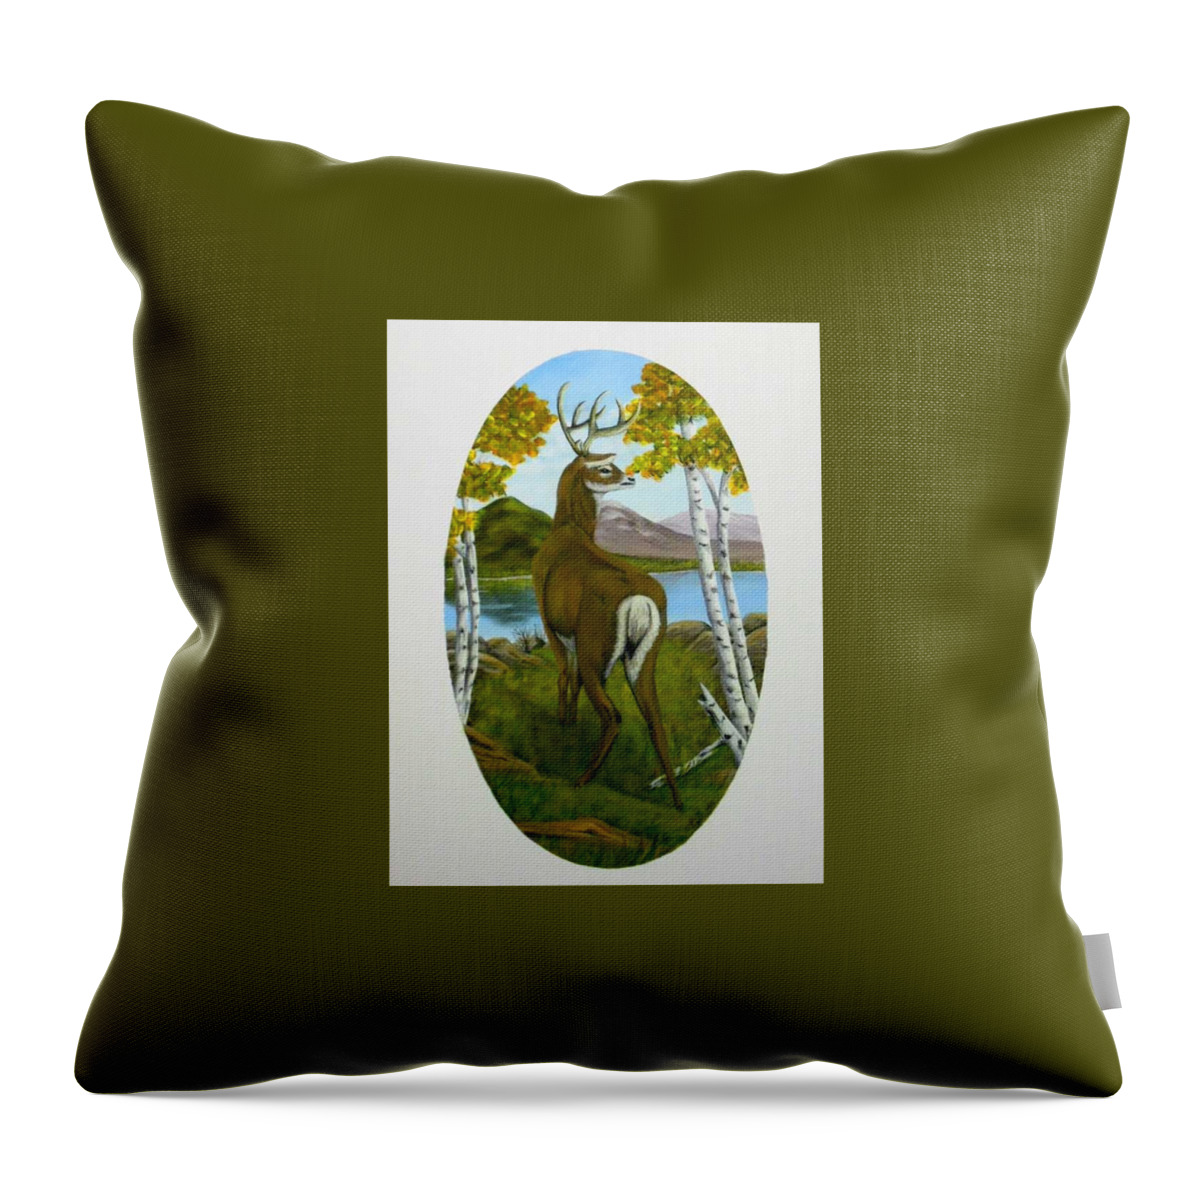 Deer Throw Pillow featuring the painting Teddy's Deer by Sheri Keith